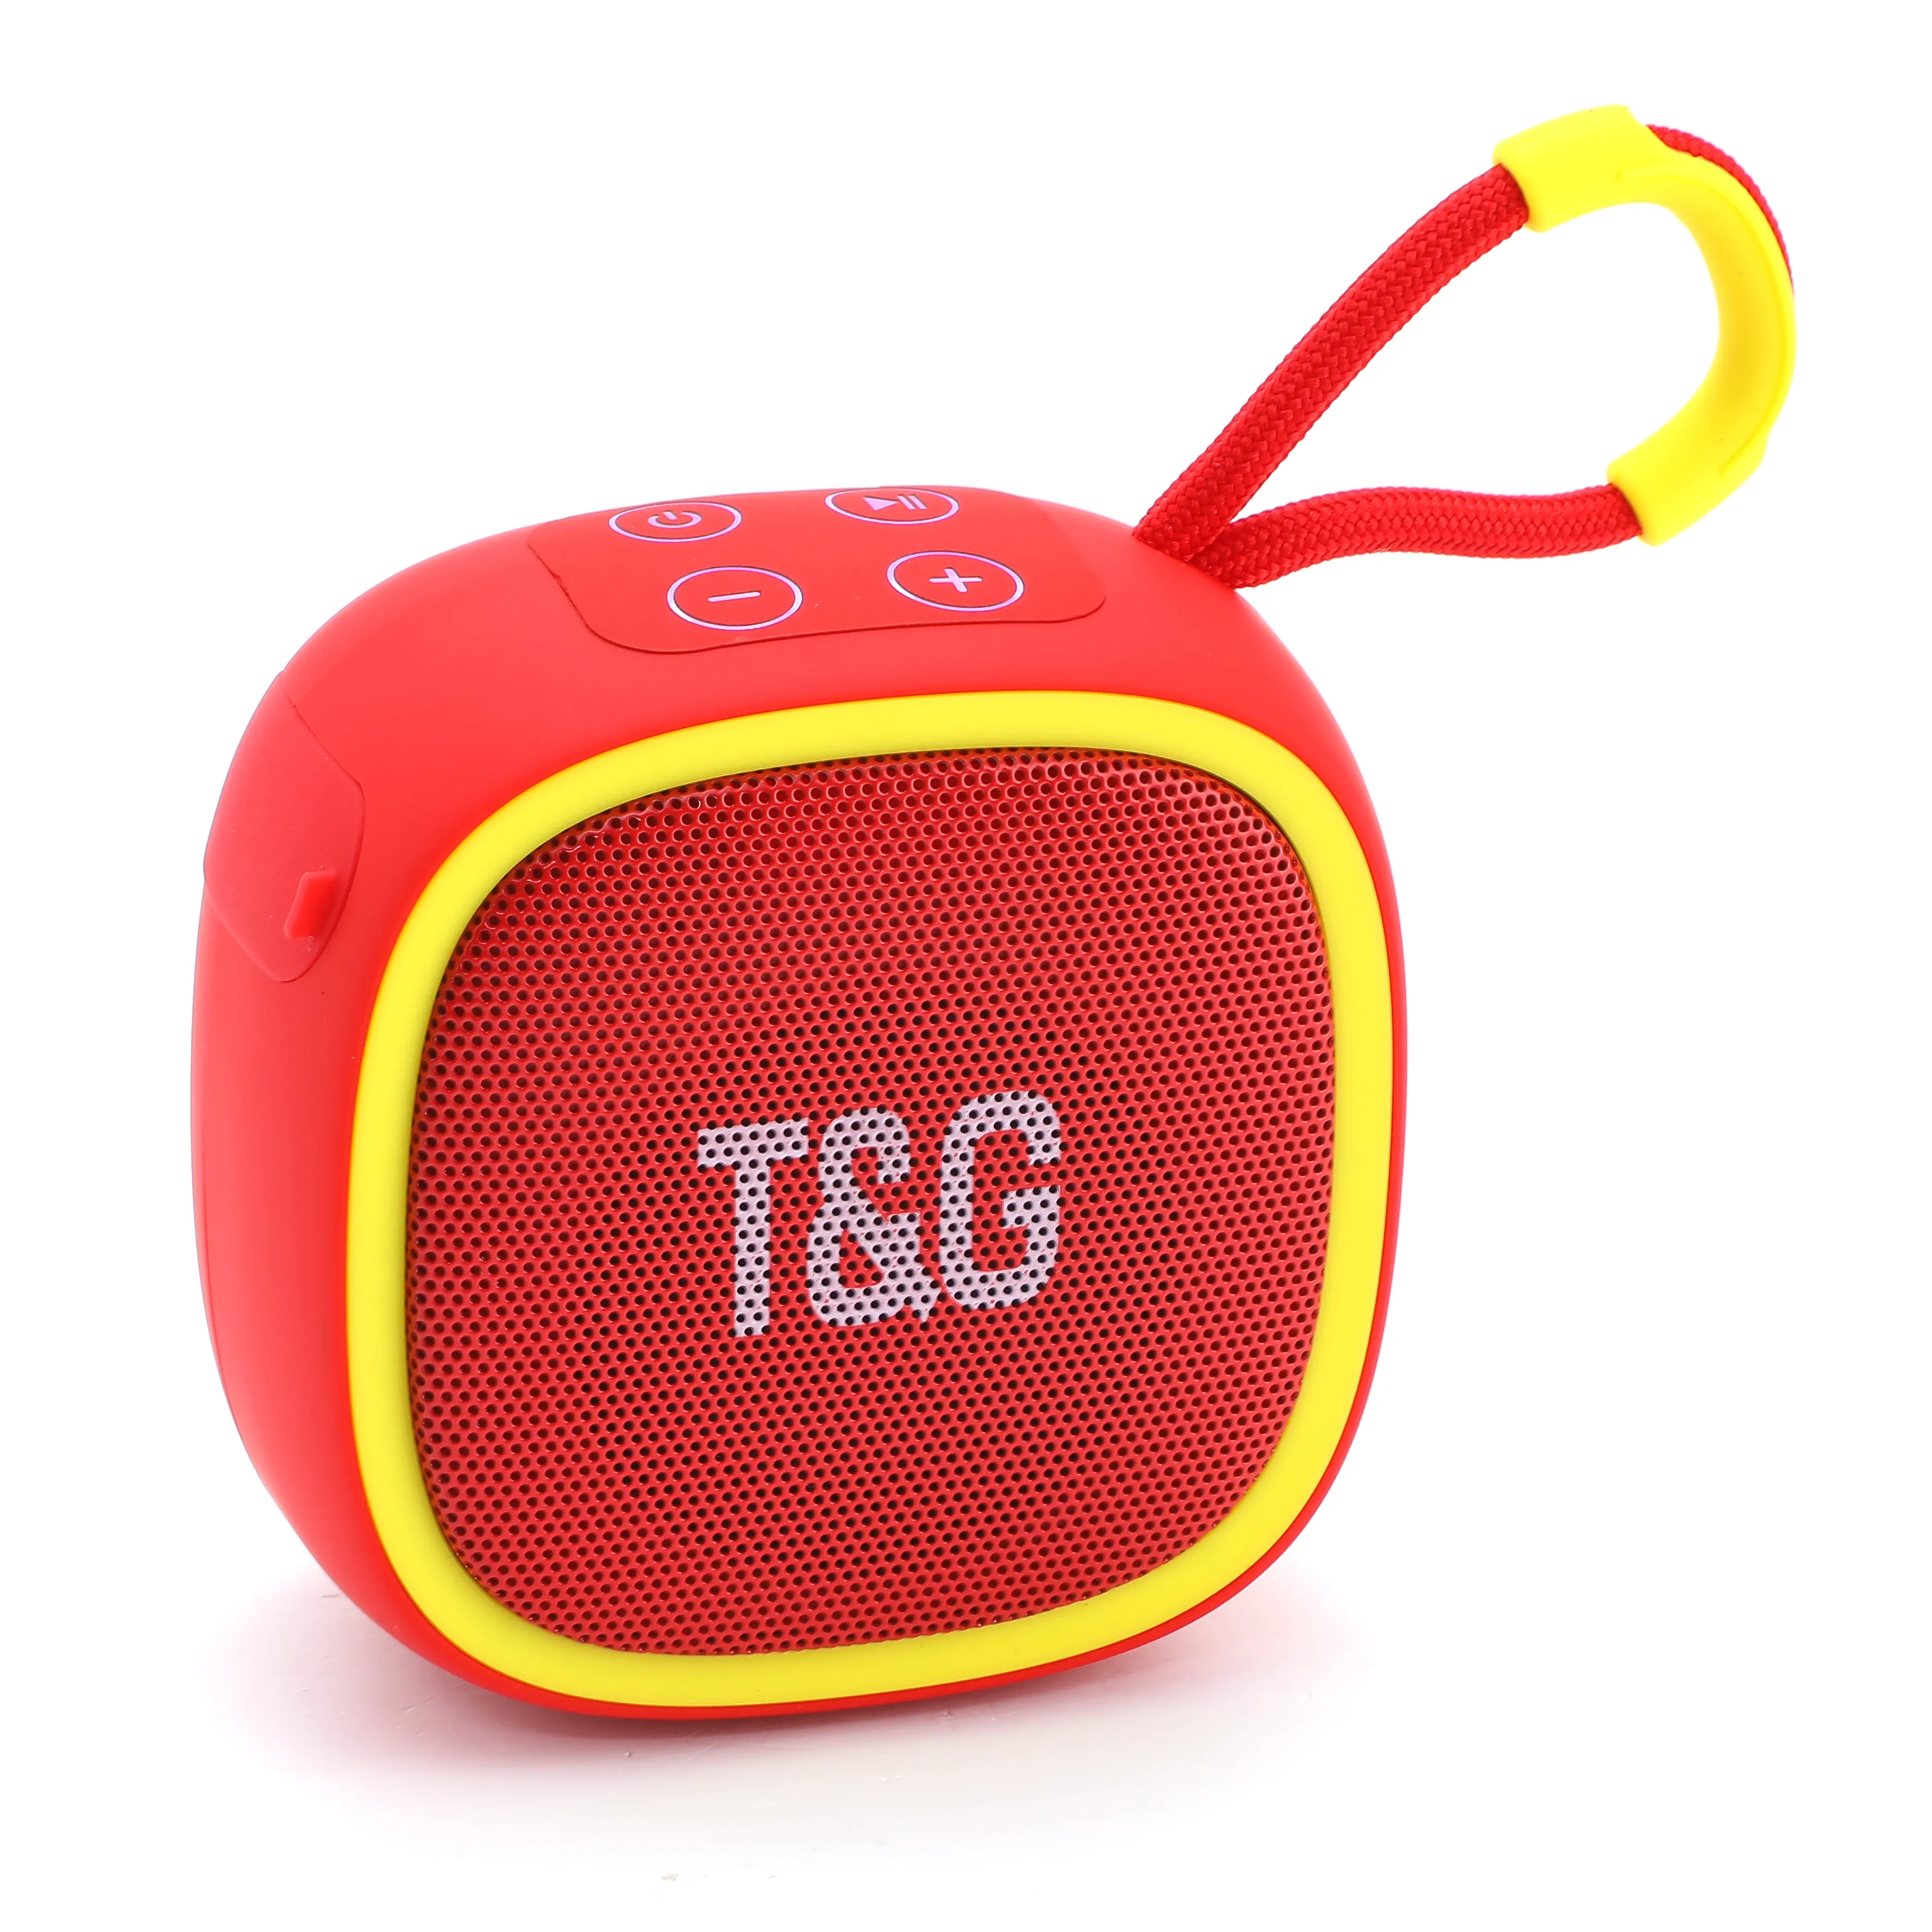 New Arrival 2023 Products TG659 Wireless Speaker Super Quality Outdoor Portable Sound Bass Support BT TF FM AUX USB TWS Speakers